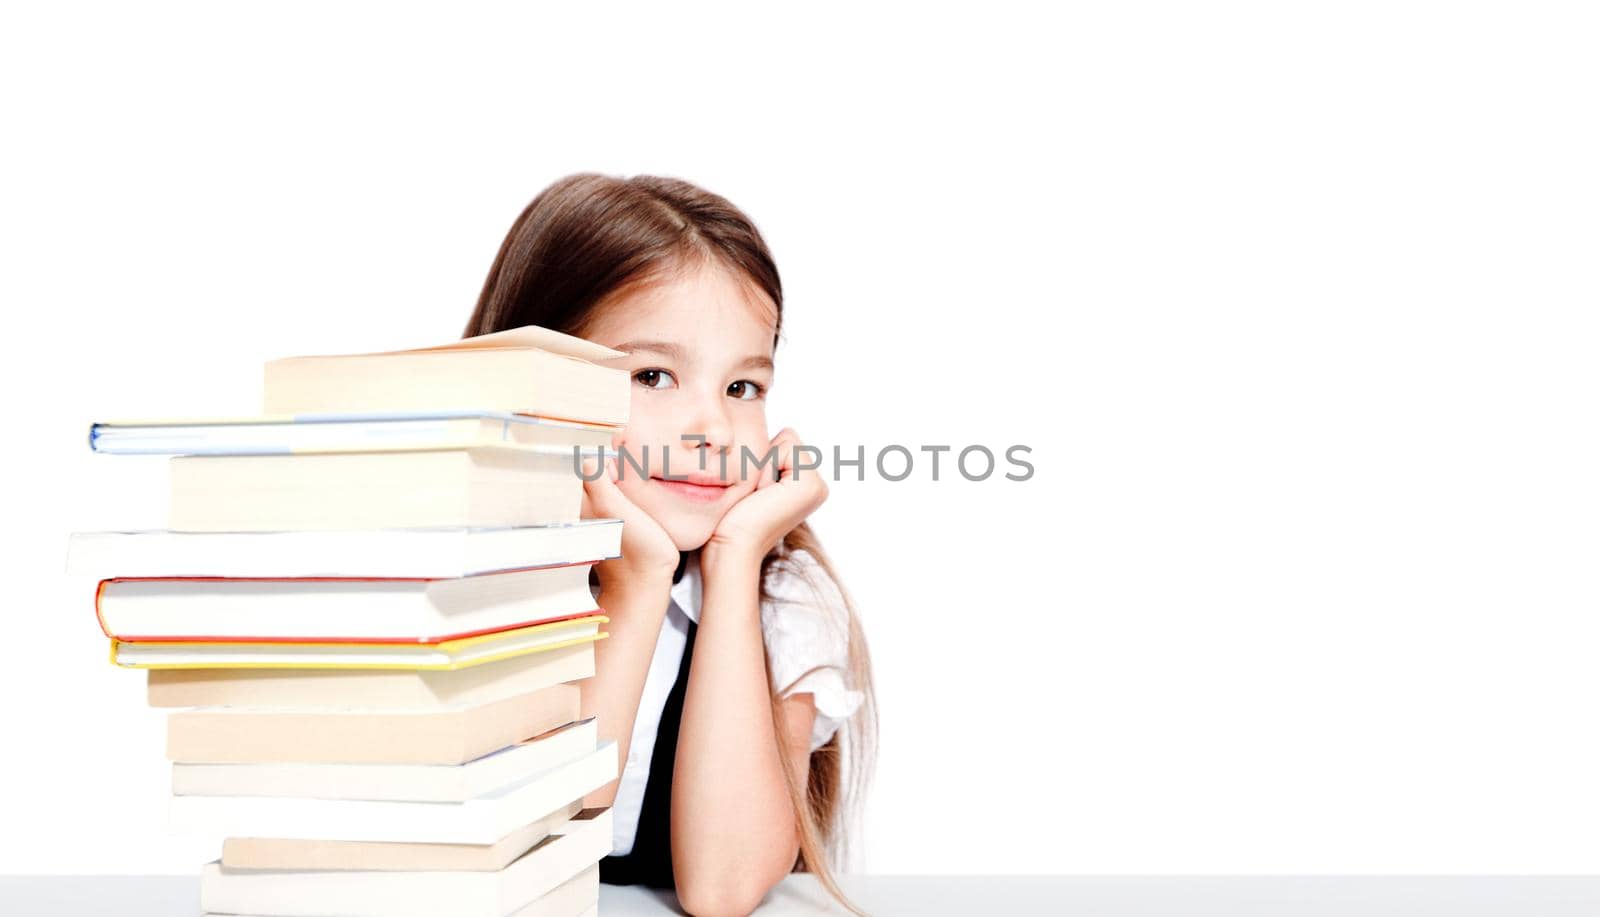 Young cute girl sitting at the table and reading a book by Taut